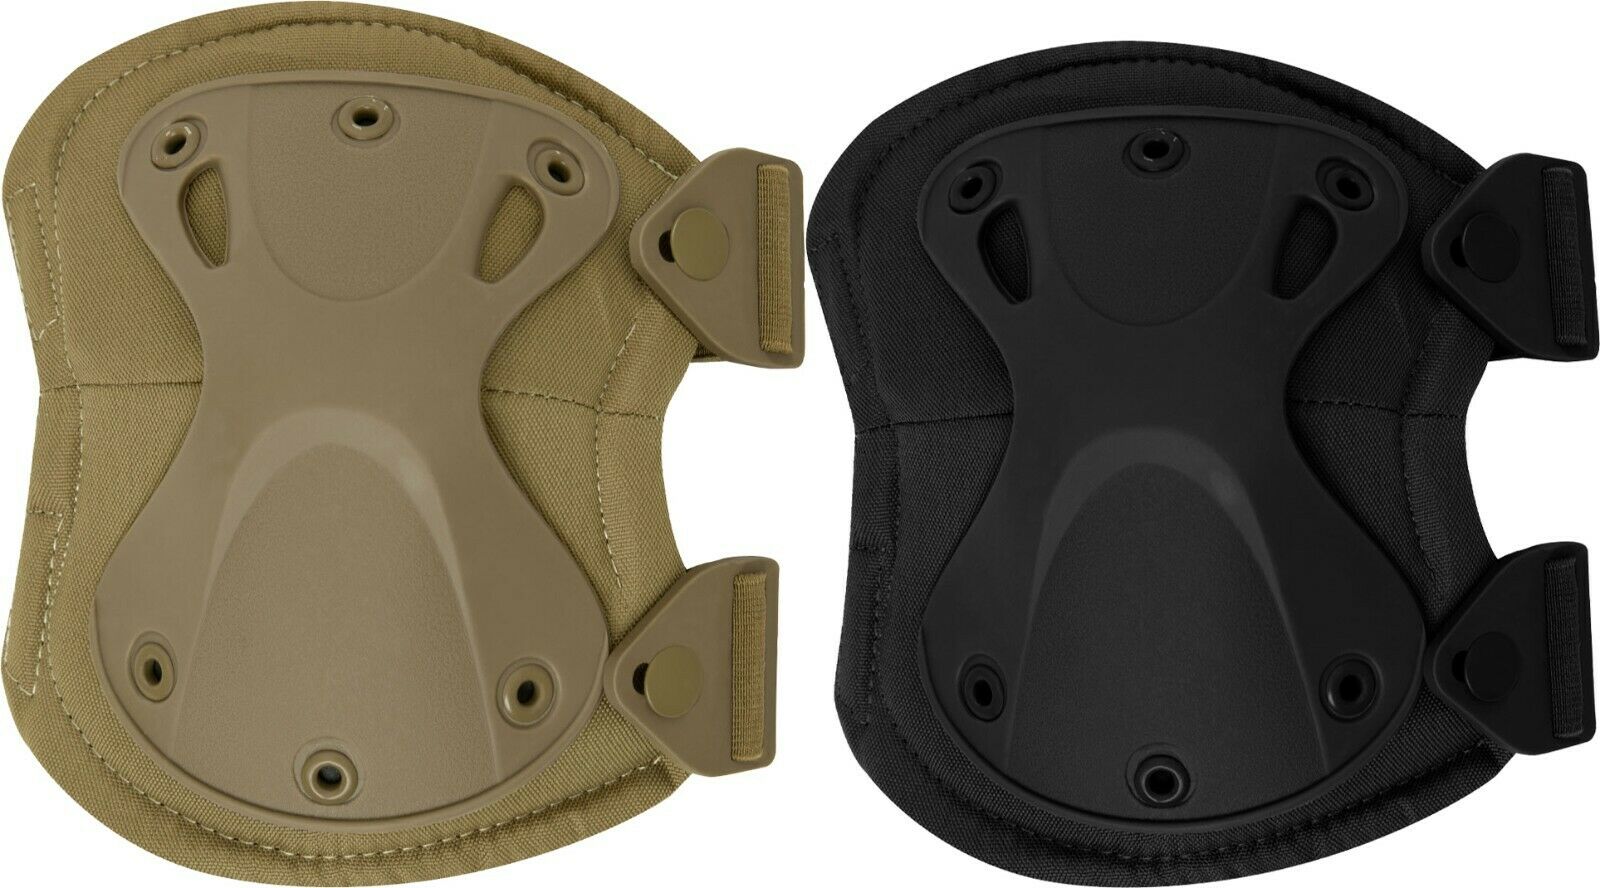 Tactical Low Profile Knee Pads, Thick Flex Superior Combat Protection